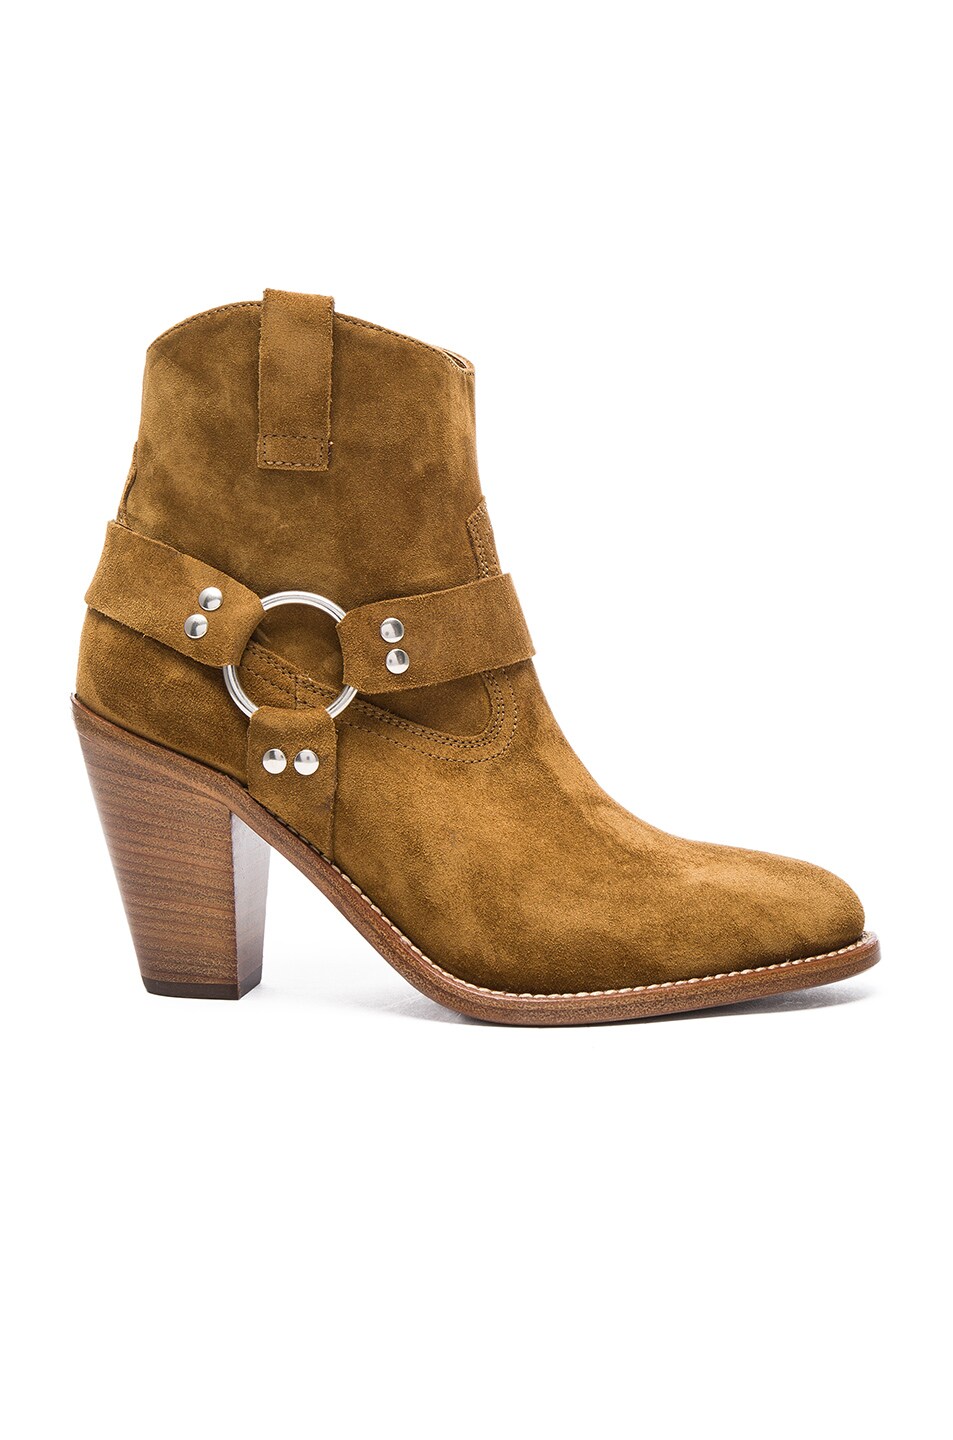 Image 1 of Saint Laurent Suede Curtis Harness Boots in Tan